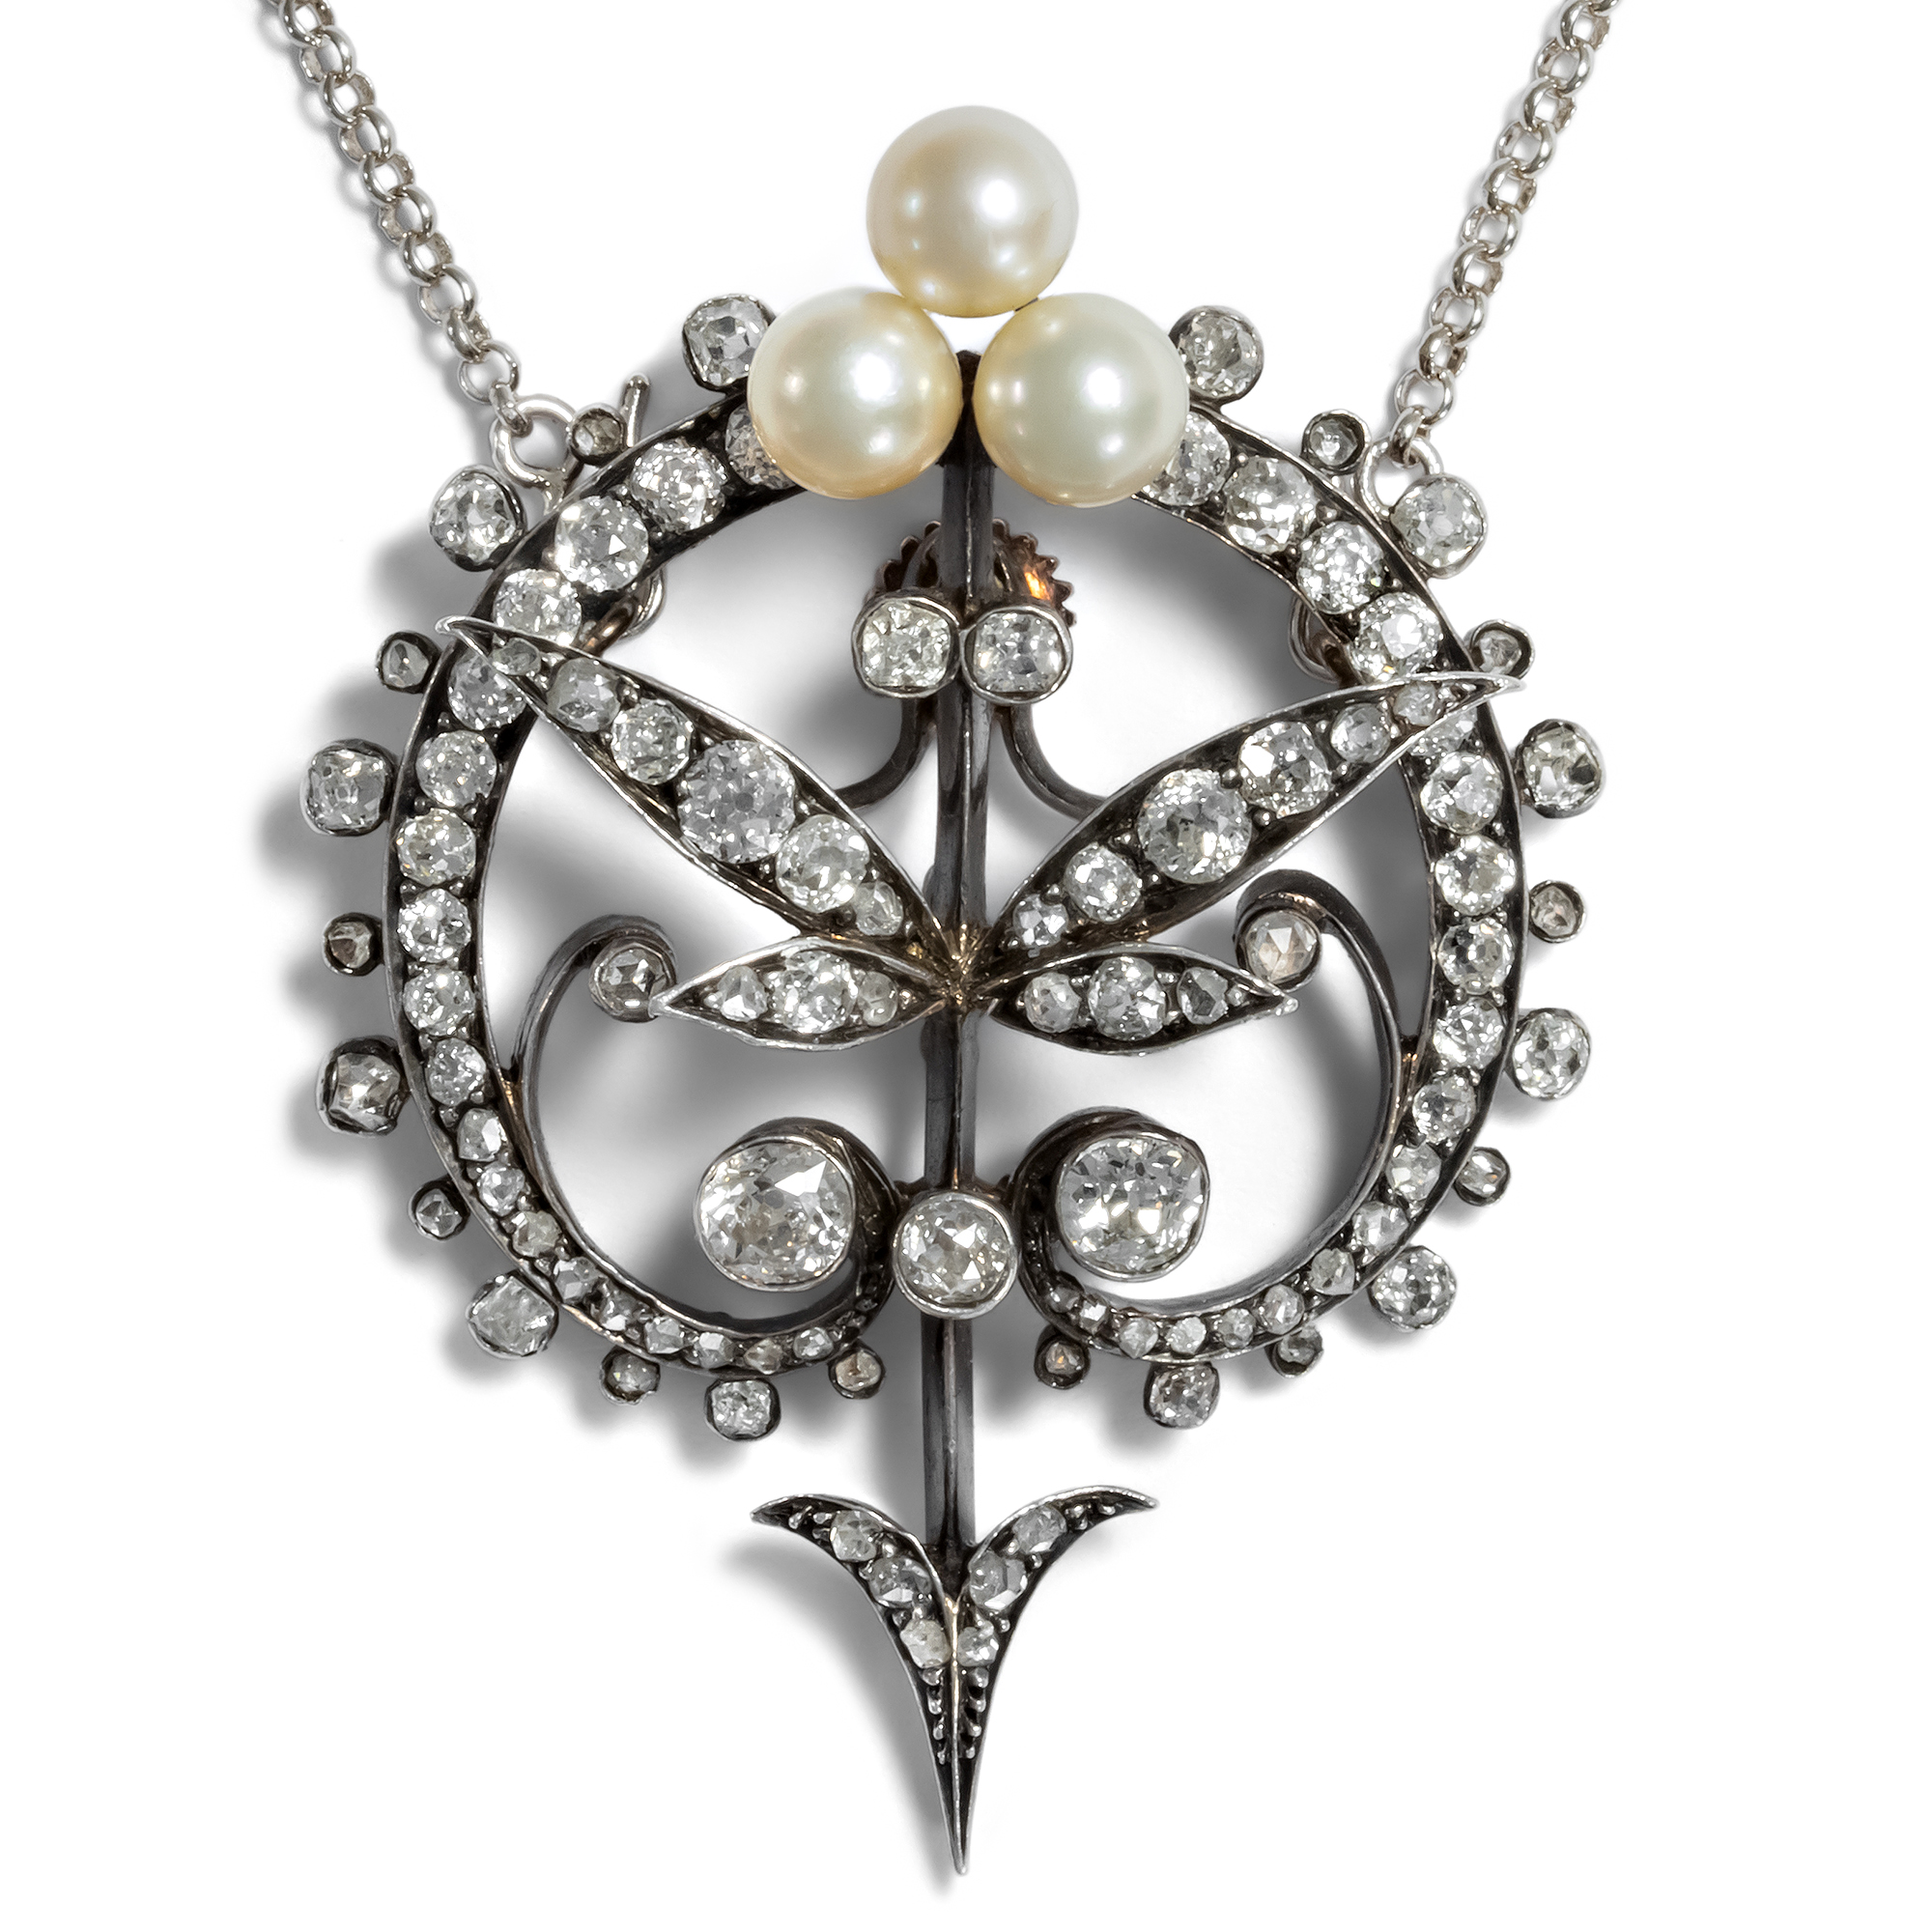 Magnificent Pendant Brooch with Diamonds & Pearls, c. 1880